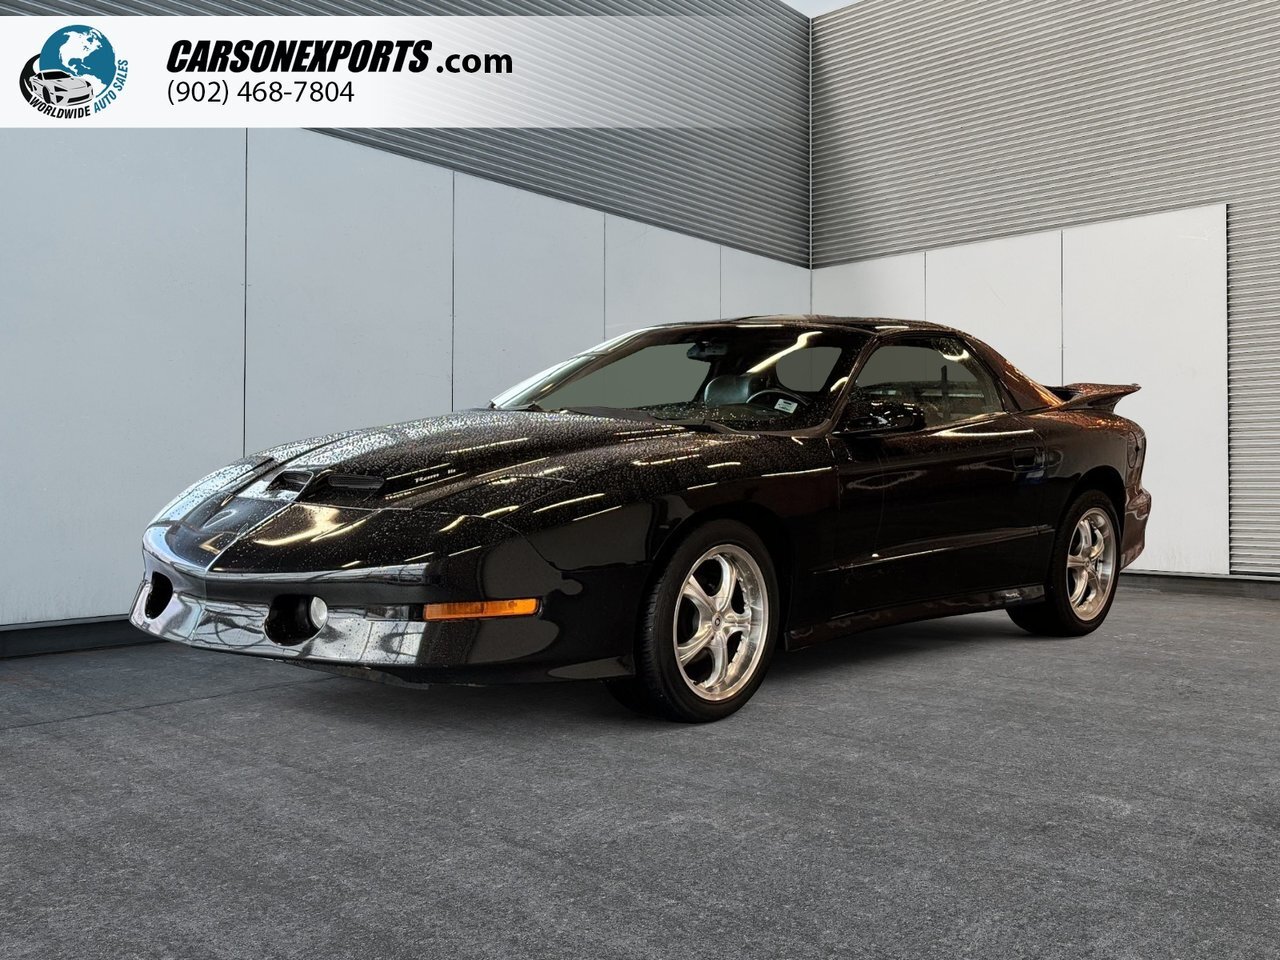 1997 Pontiac Firebird Trans Am The best place to buy a used car. Period.